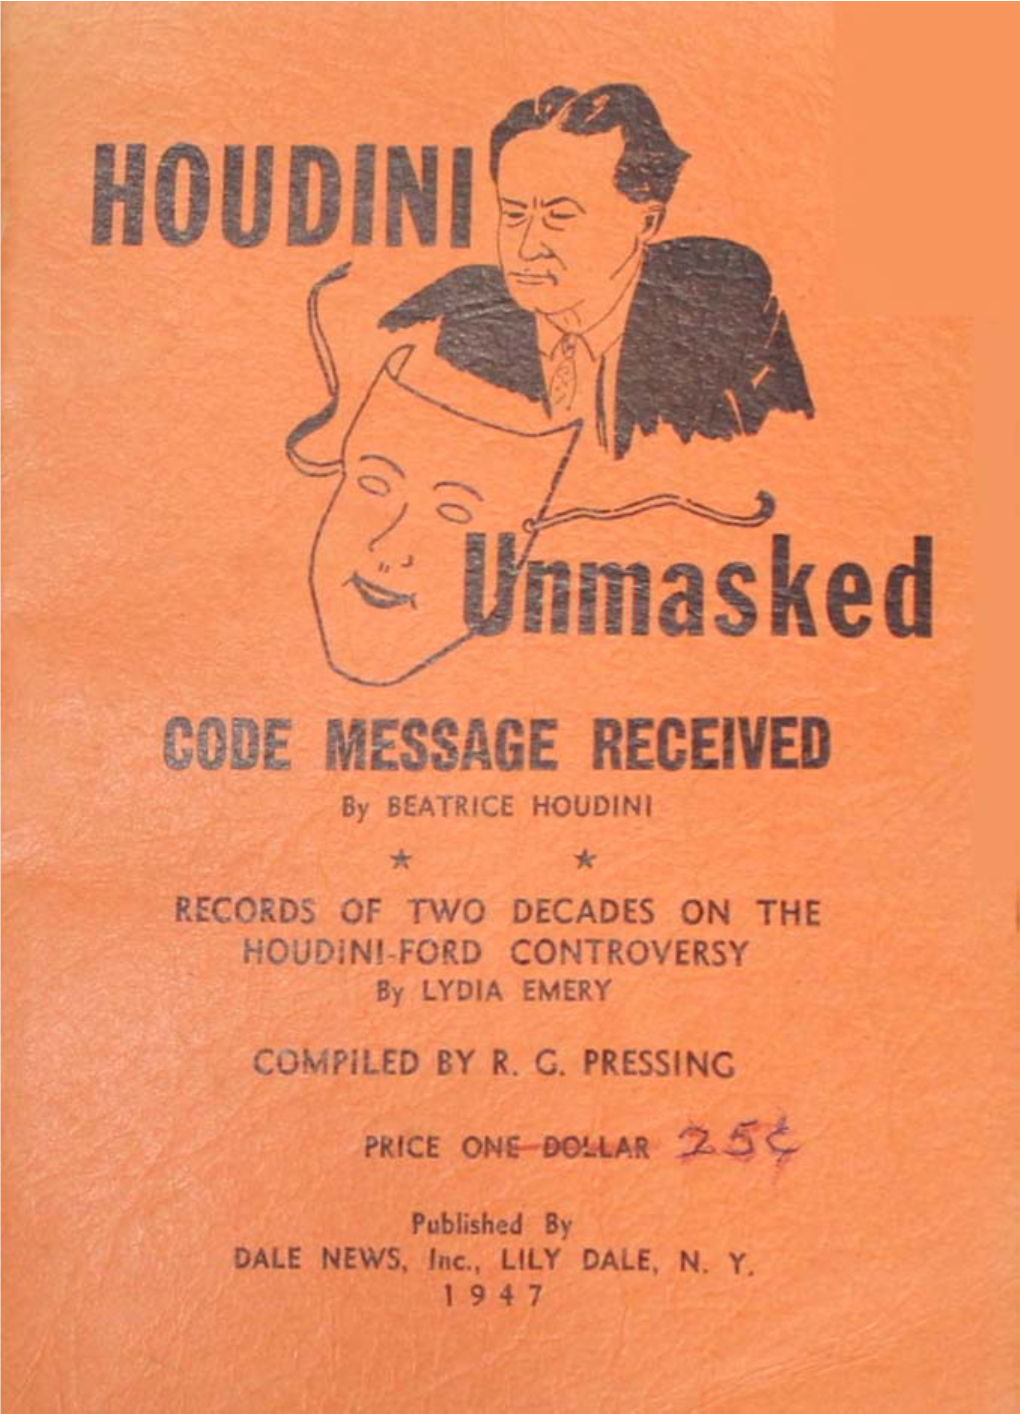 CODE MESSAGE RECEIVED by BEATRICE HOUDINI